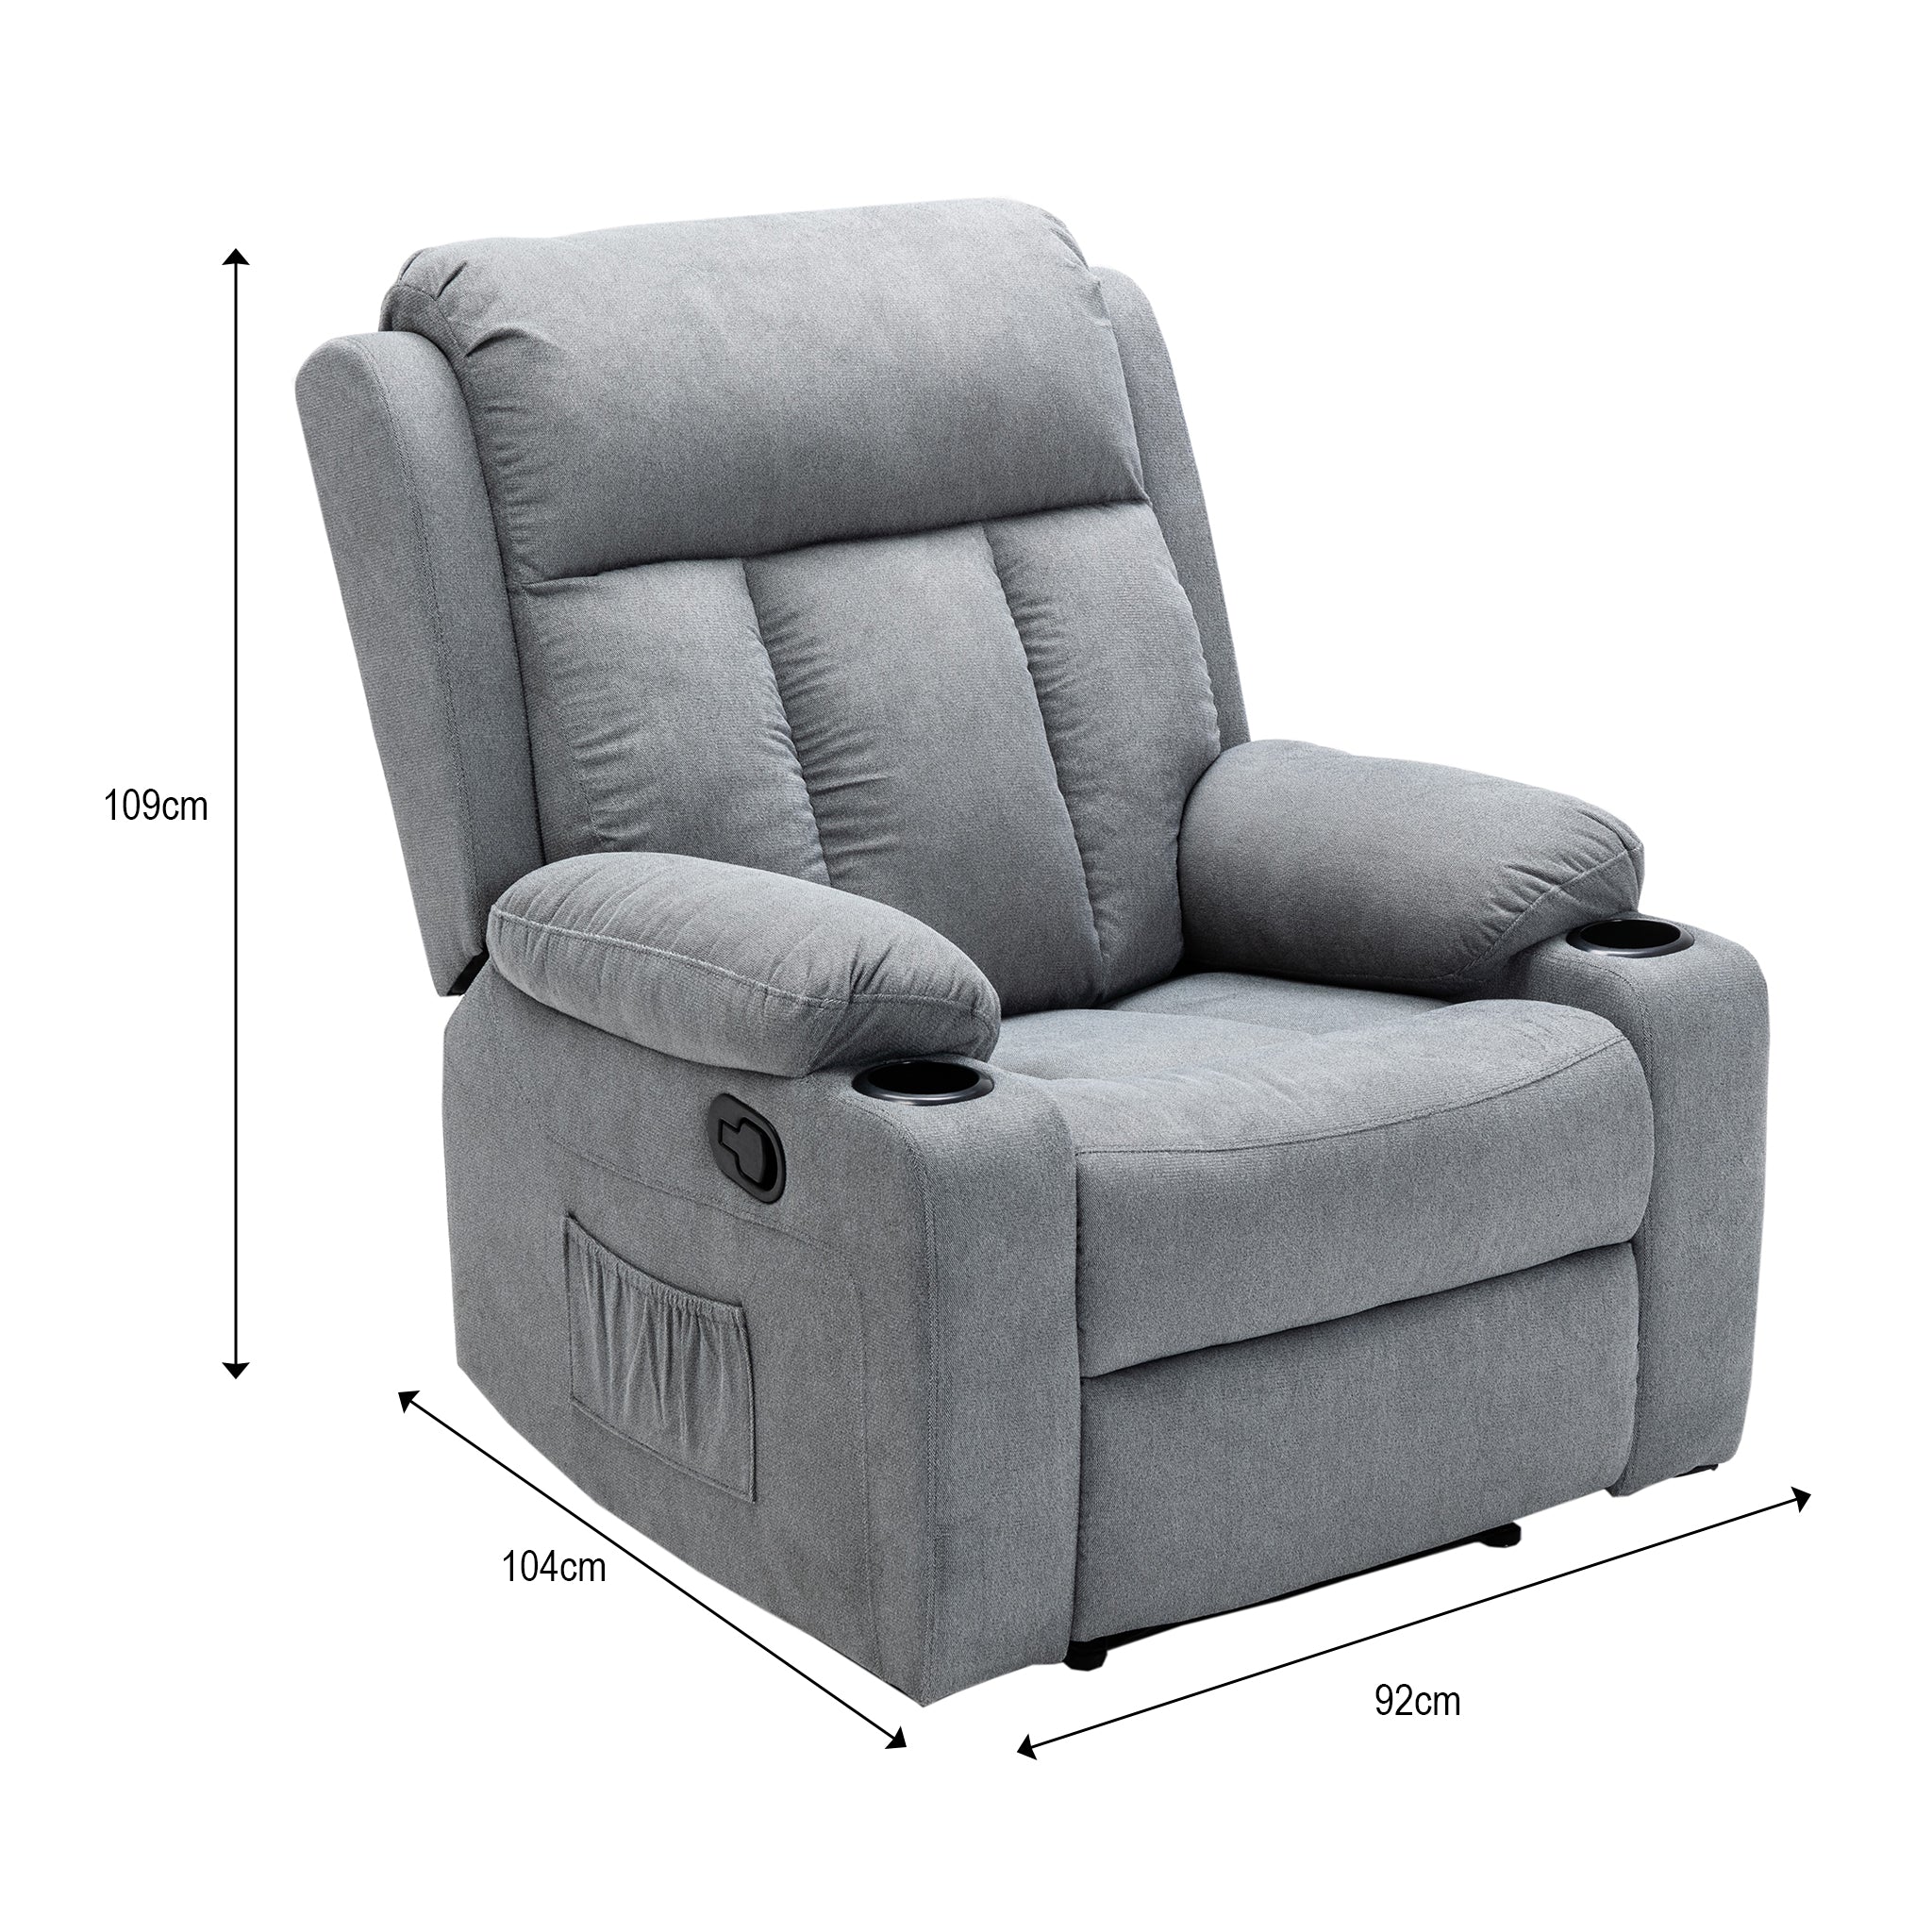 Lexi Recliner Armchair in Grey, Model CR-2032, Comfortable Seating Furniture3